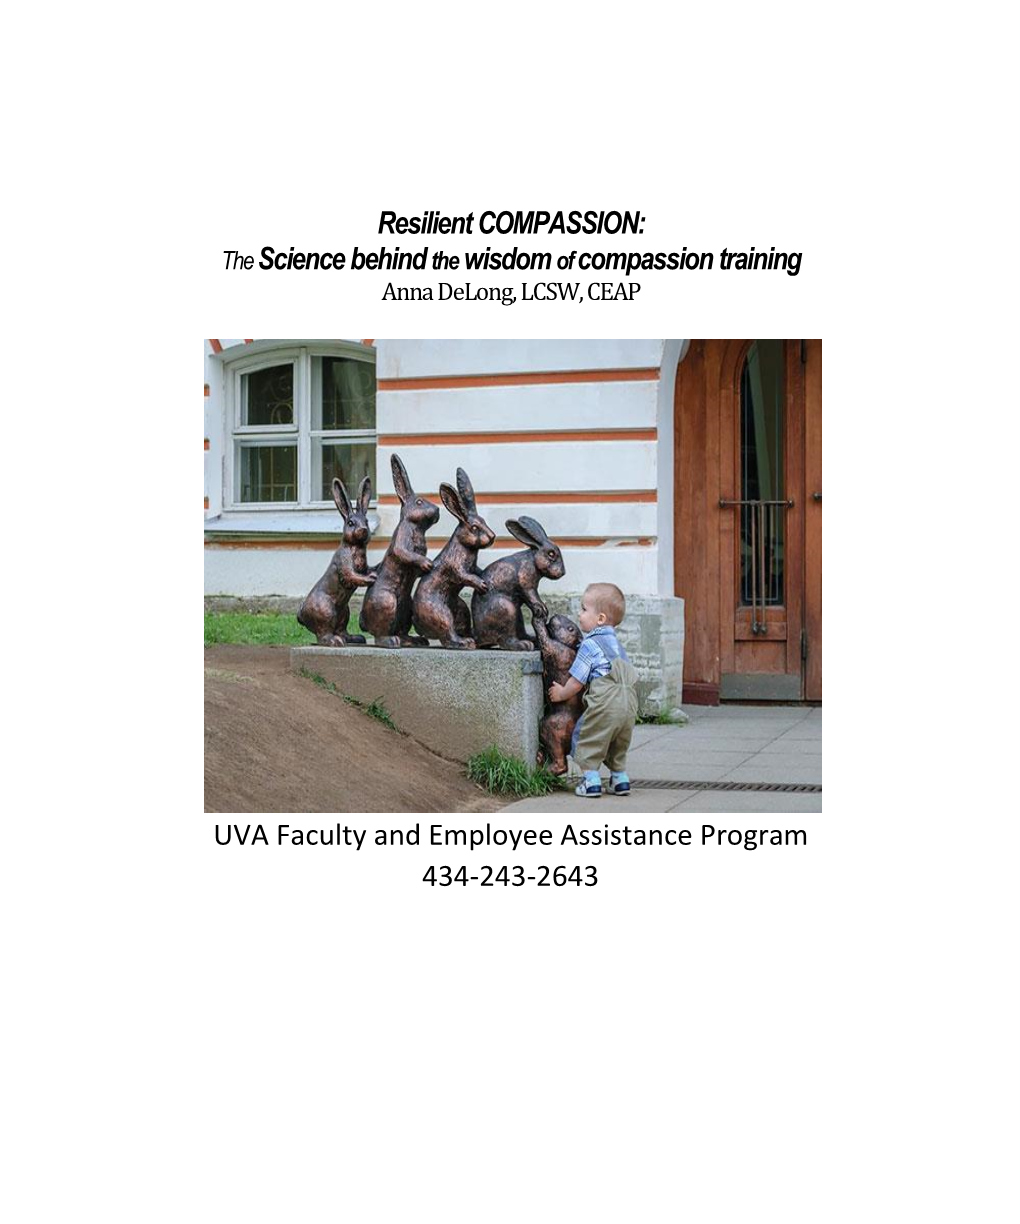 Resilient COMPASSION: the Science Behind the Wisdom of Compassion Training Anna Delong, LCSW, CEAP